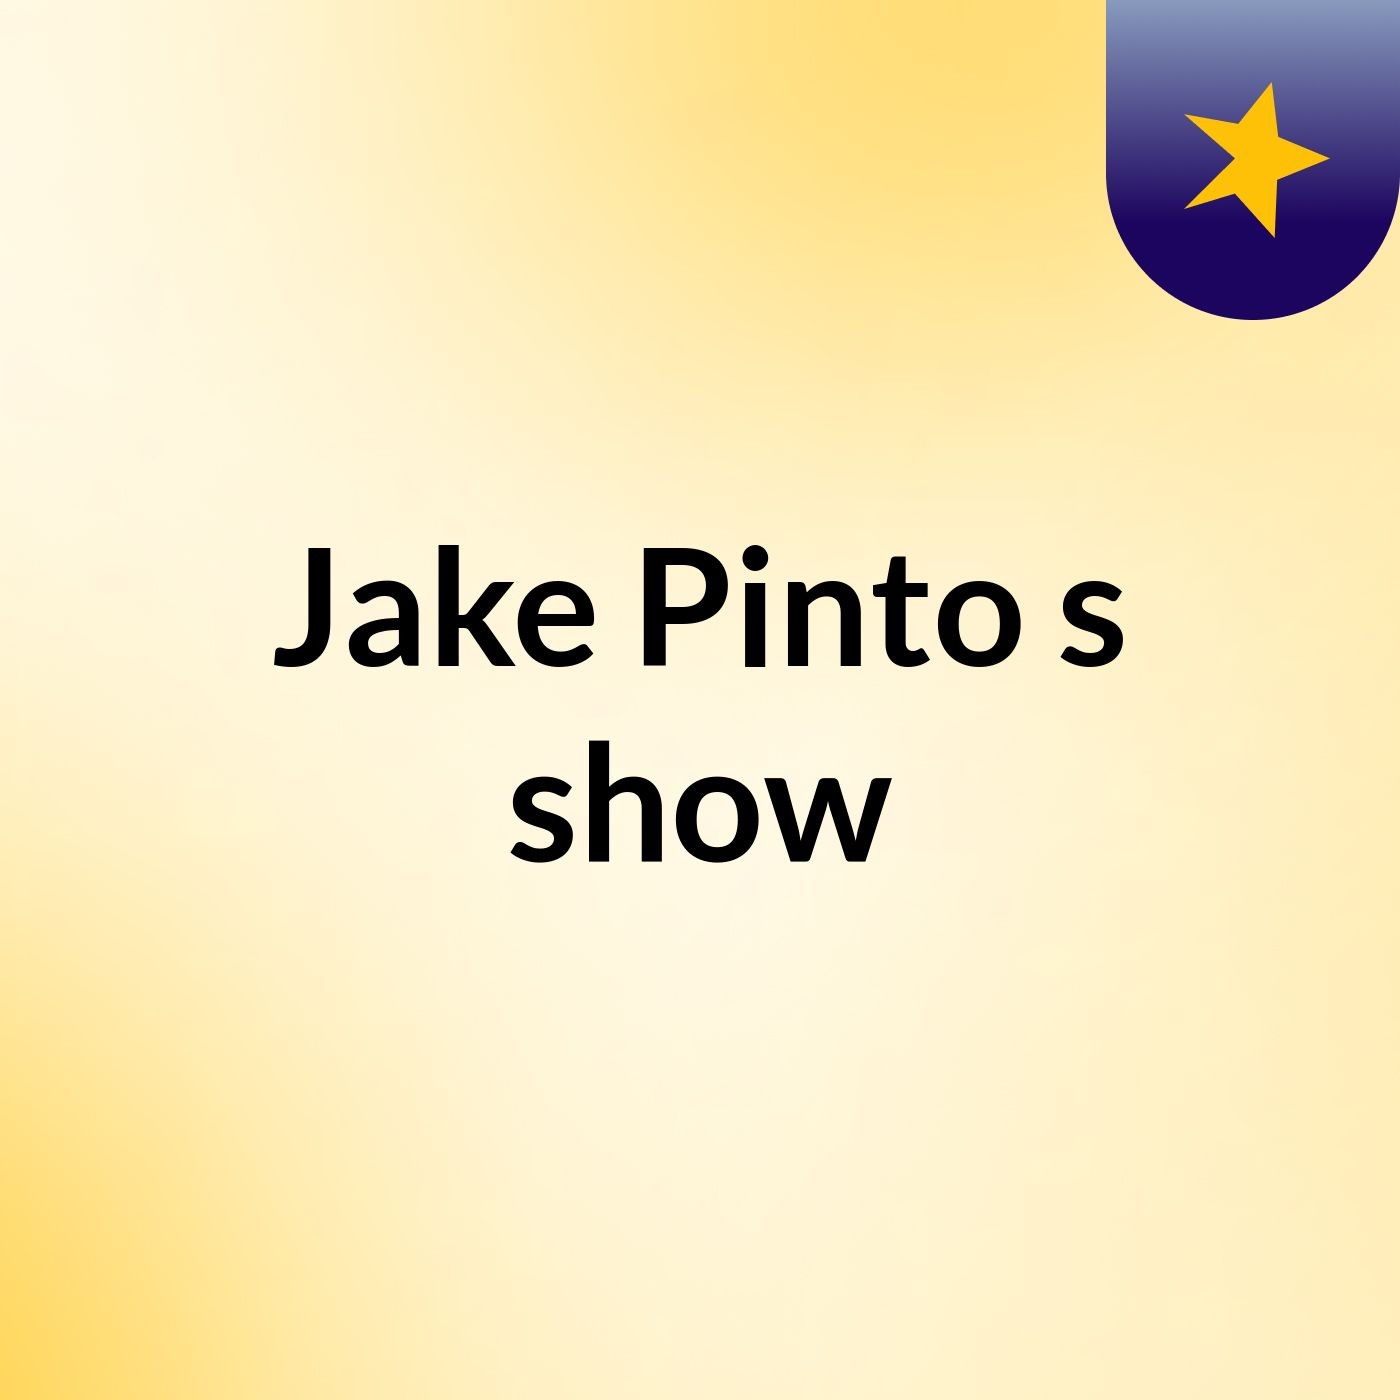 Jake Pinto's show